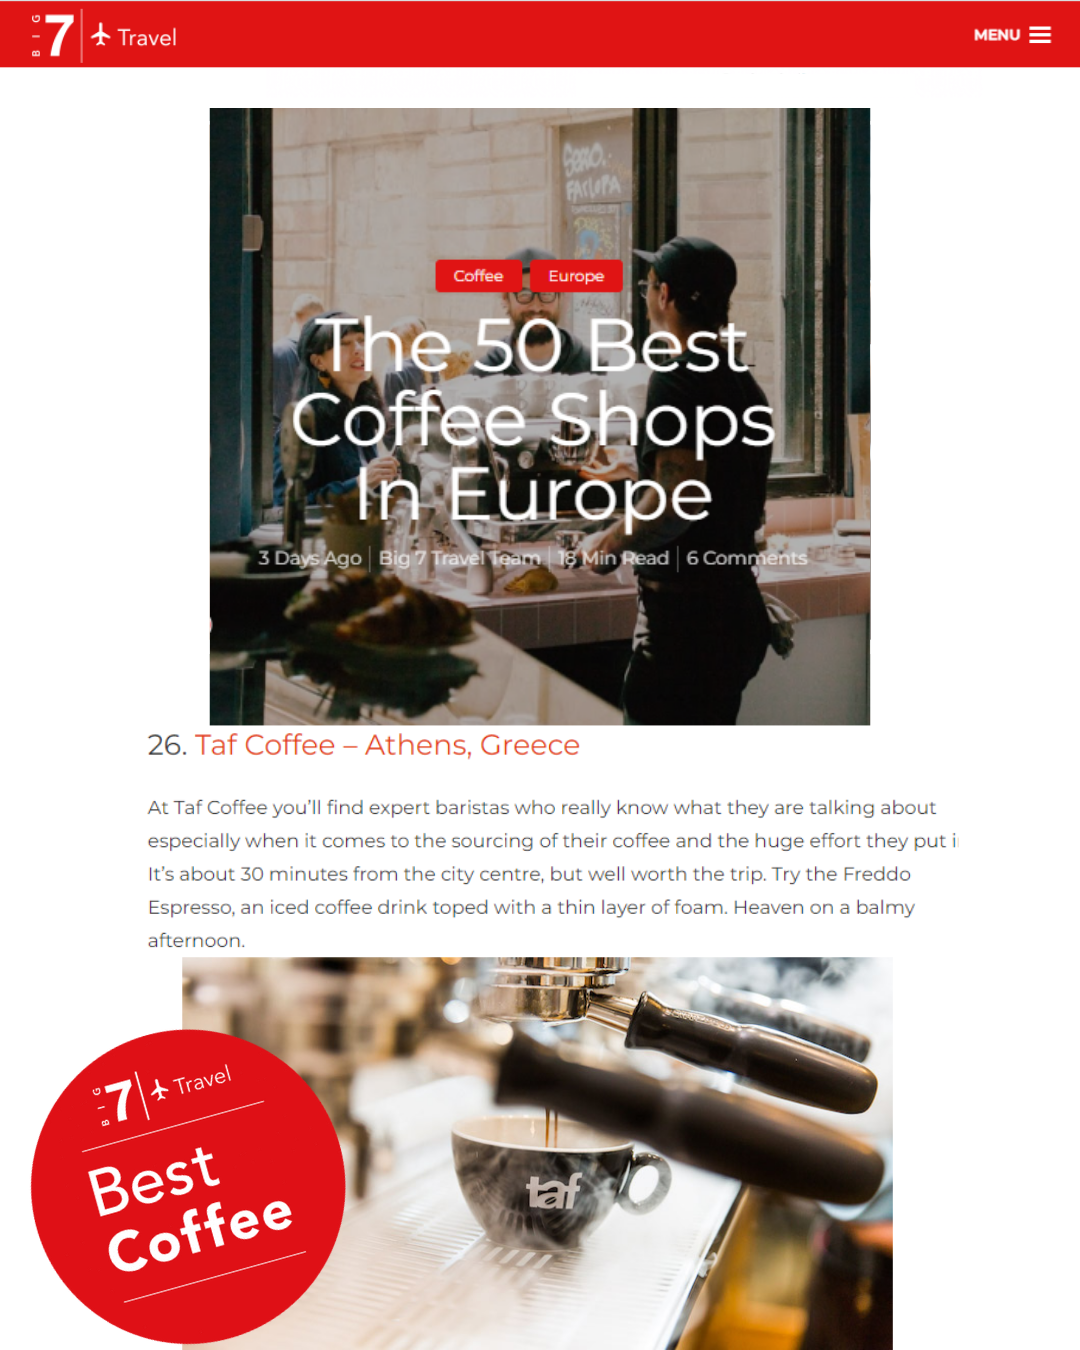 1st April, Big 7 Travel, The 50 Best Coffee Shops In Europe